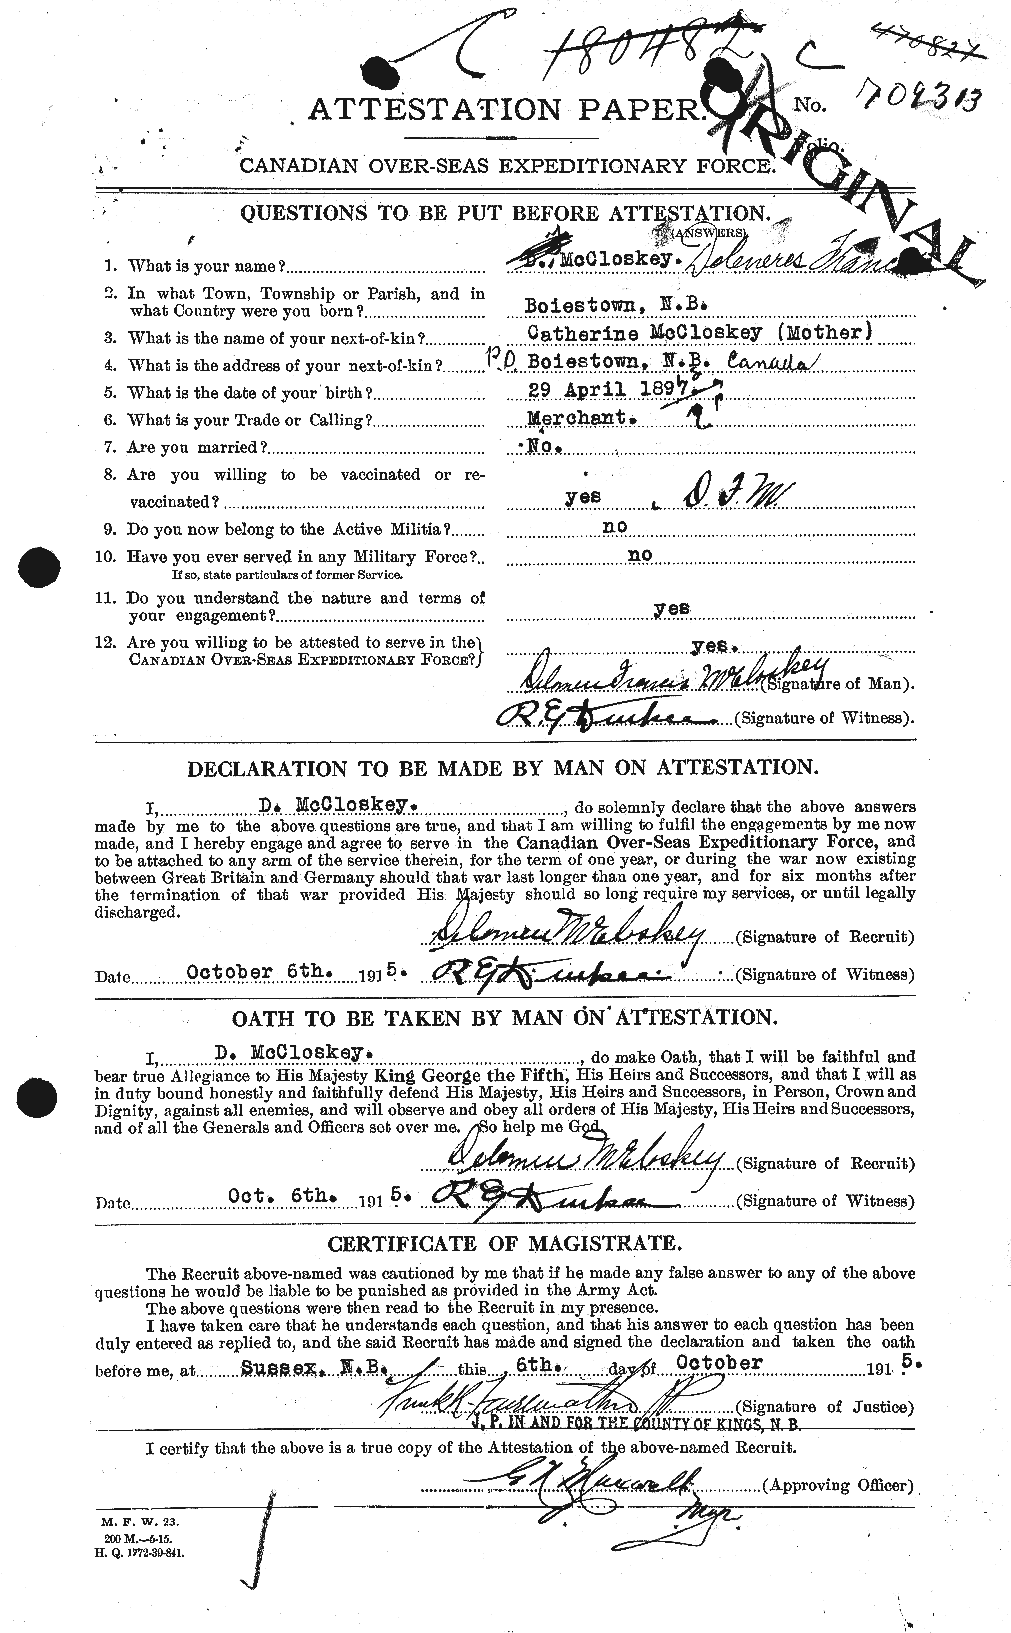 Personnel Records of the First World War - CEF 134634a